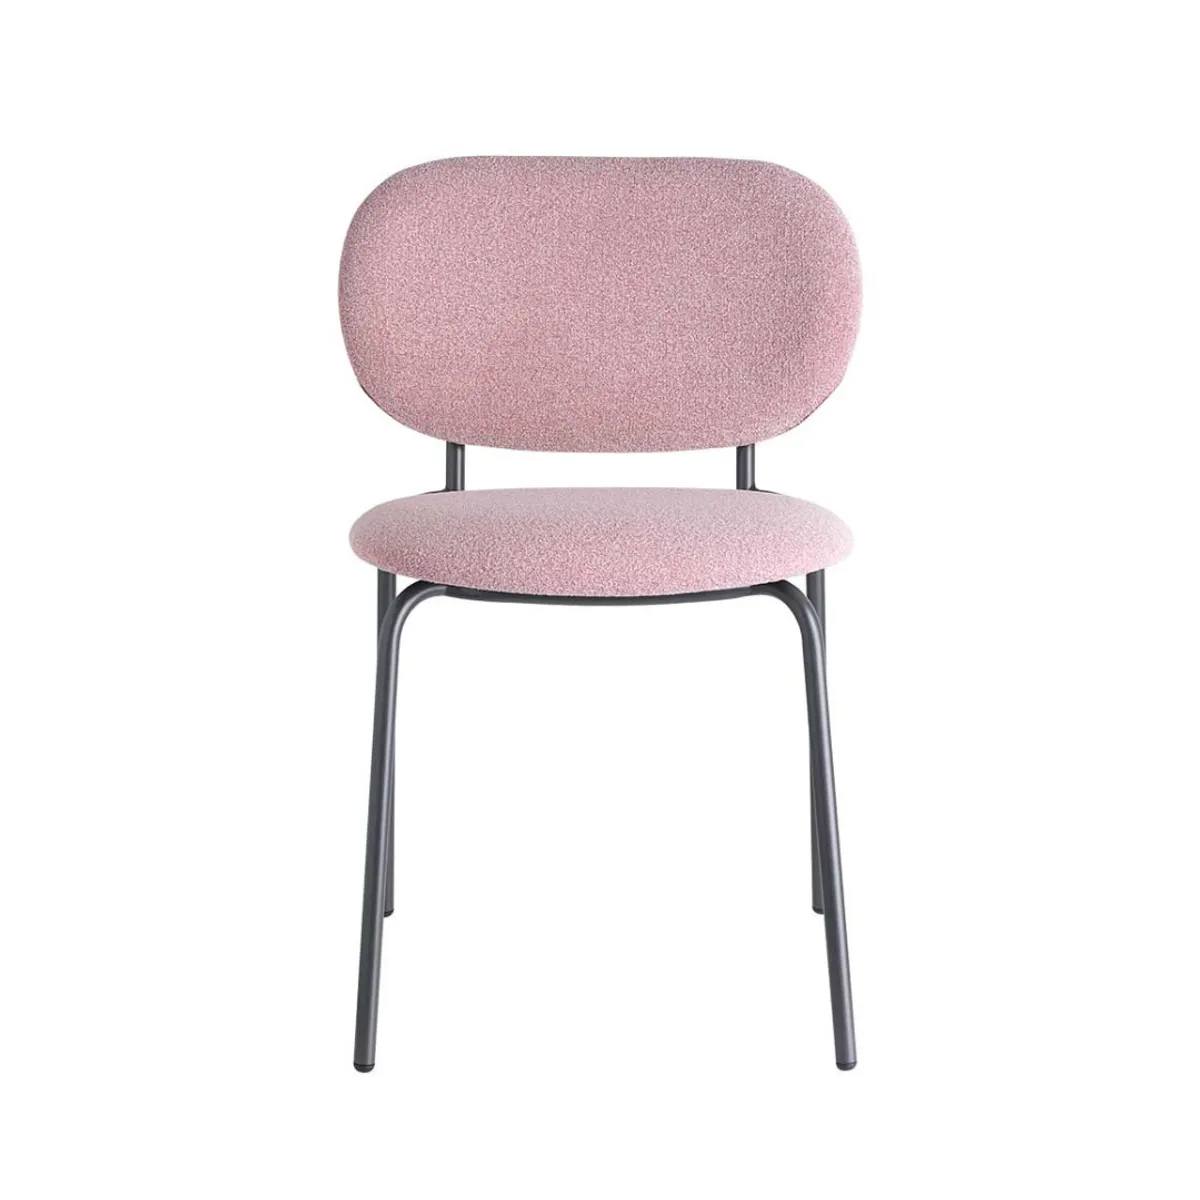 Layla soft side chair 3